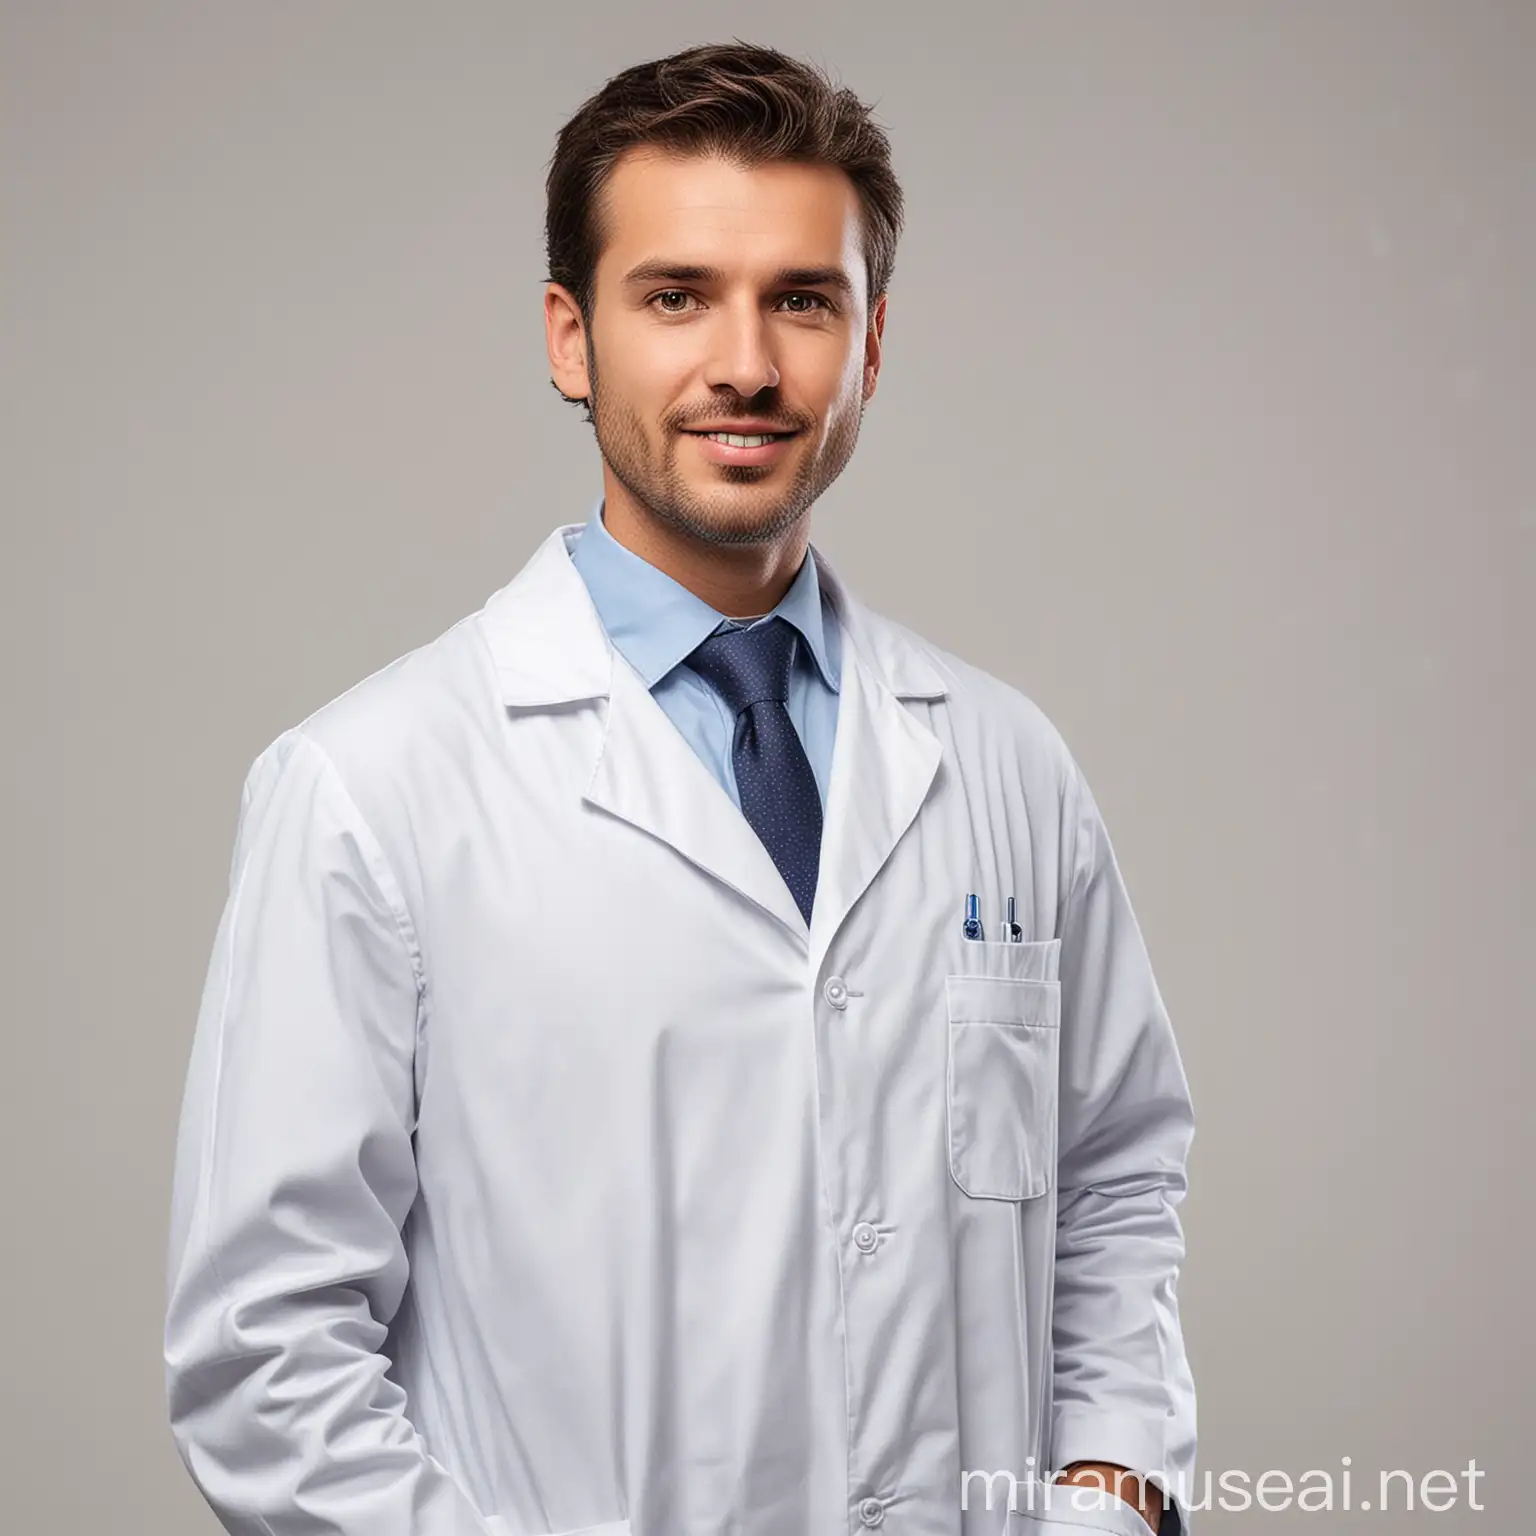 Nutrition Doctor in Lab Coat on Pure White Background